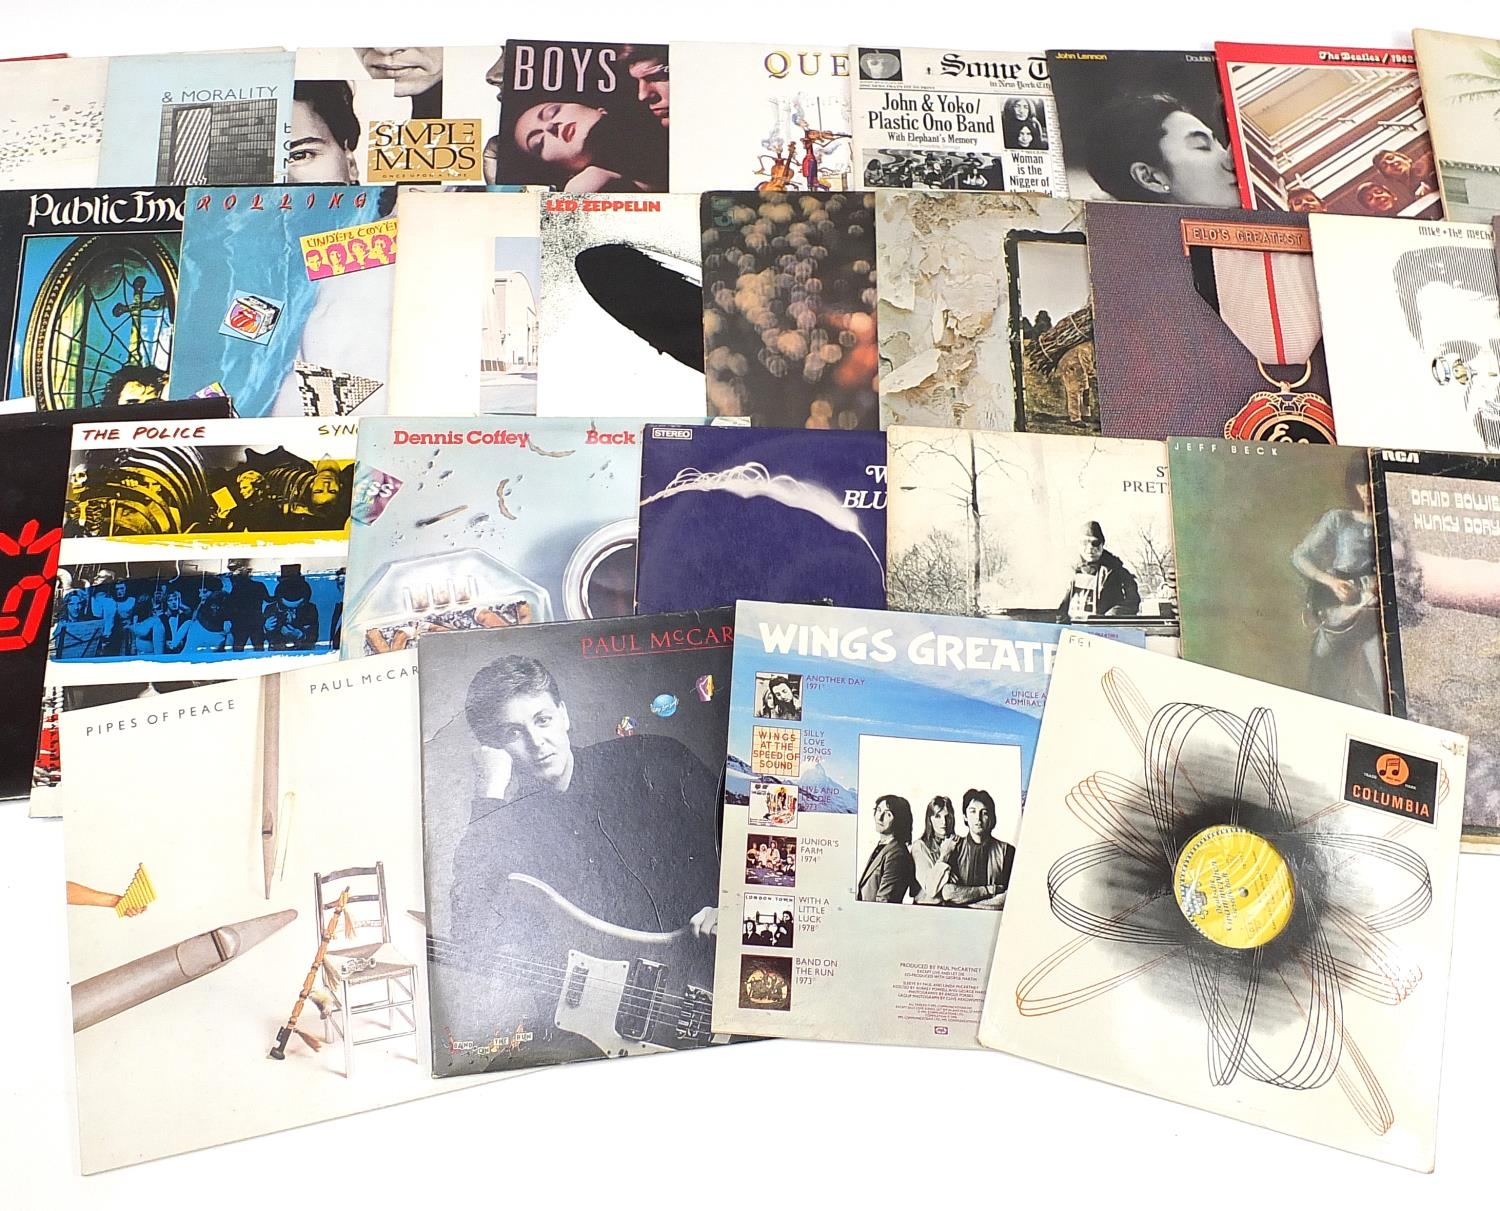 Vinyl LP records including Led Zeppelin, Genesis, Queen, The Beatles and David Bowie - Image 3 of 4